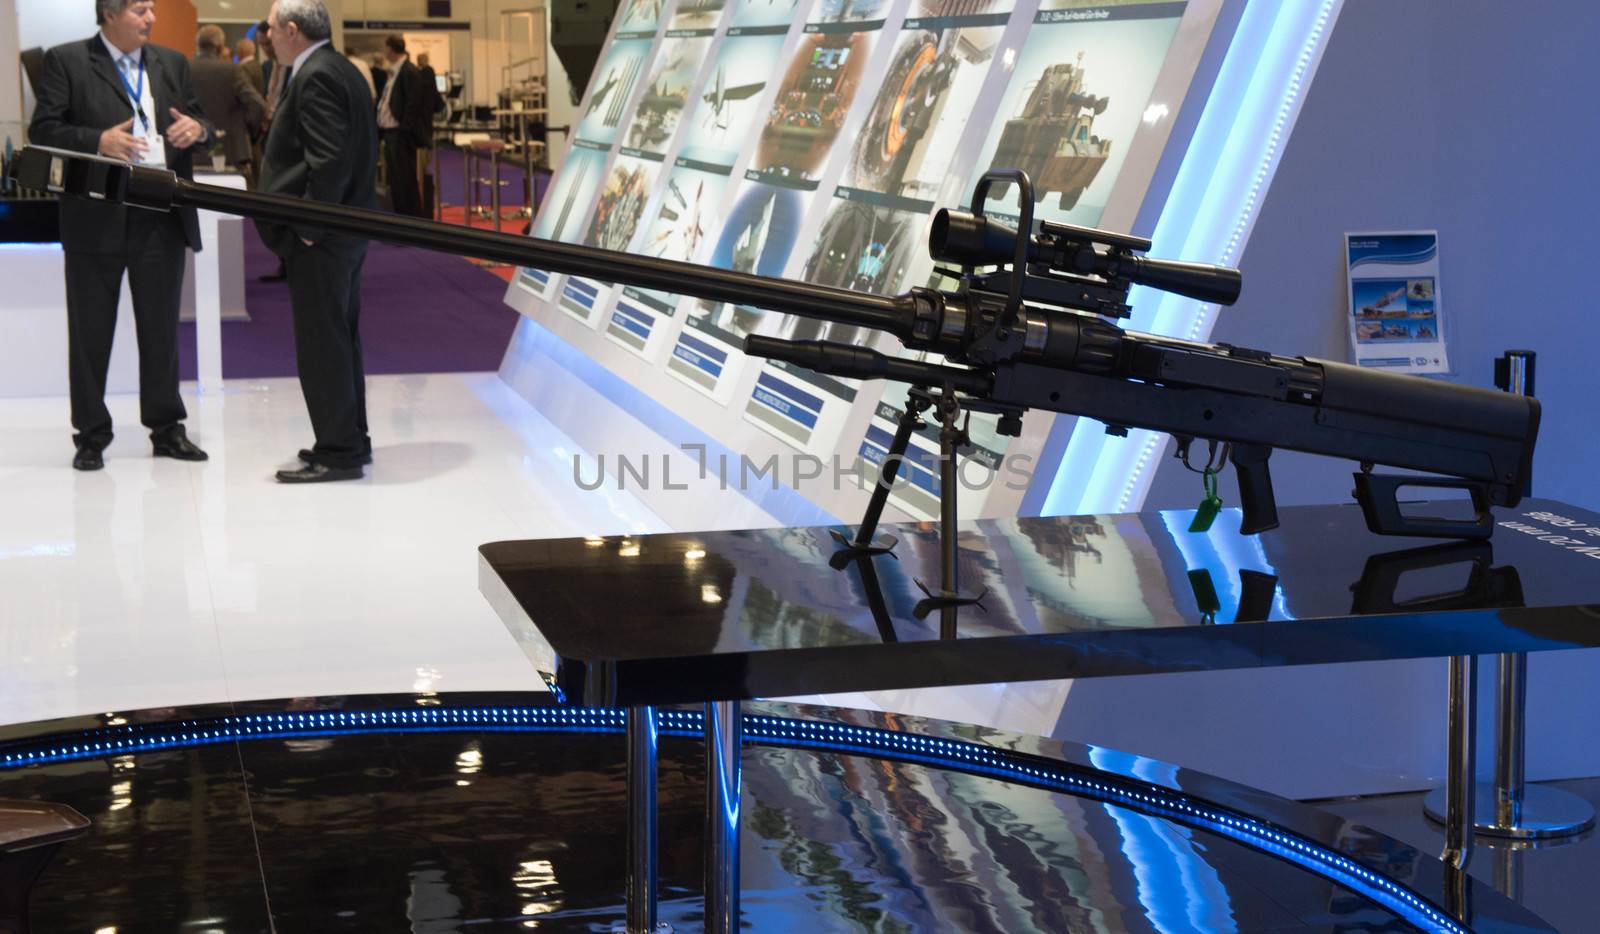 UNITED KINGDOM, London: Sniper rifle	The Defence and Security International Exhibition (DSEI) began in London on September 15, 2015 despite a week of direct action protests by peace campaigners.  	The arms fair has seen over 30,000 people descend on London to see the 1,500 exhibitors who are displaying weapons of war from pistols and rifles up to tanks, assault helicopters and warships.  	Protesters attempted to block the main road into the exhibition, claiming that such an event strengthened the UK's ties to human rights abuses. 